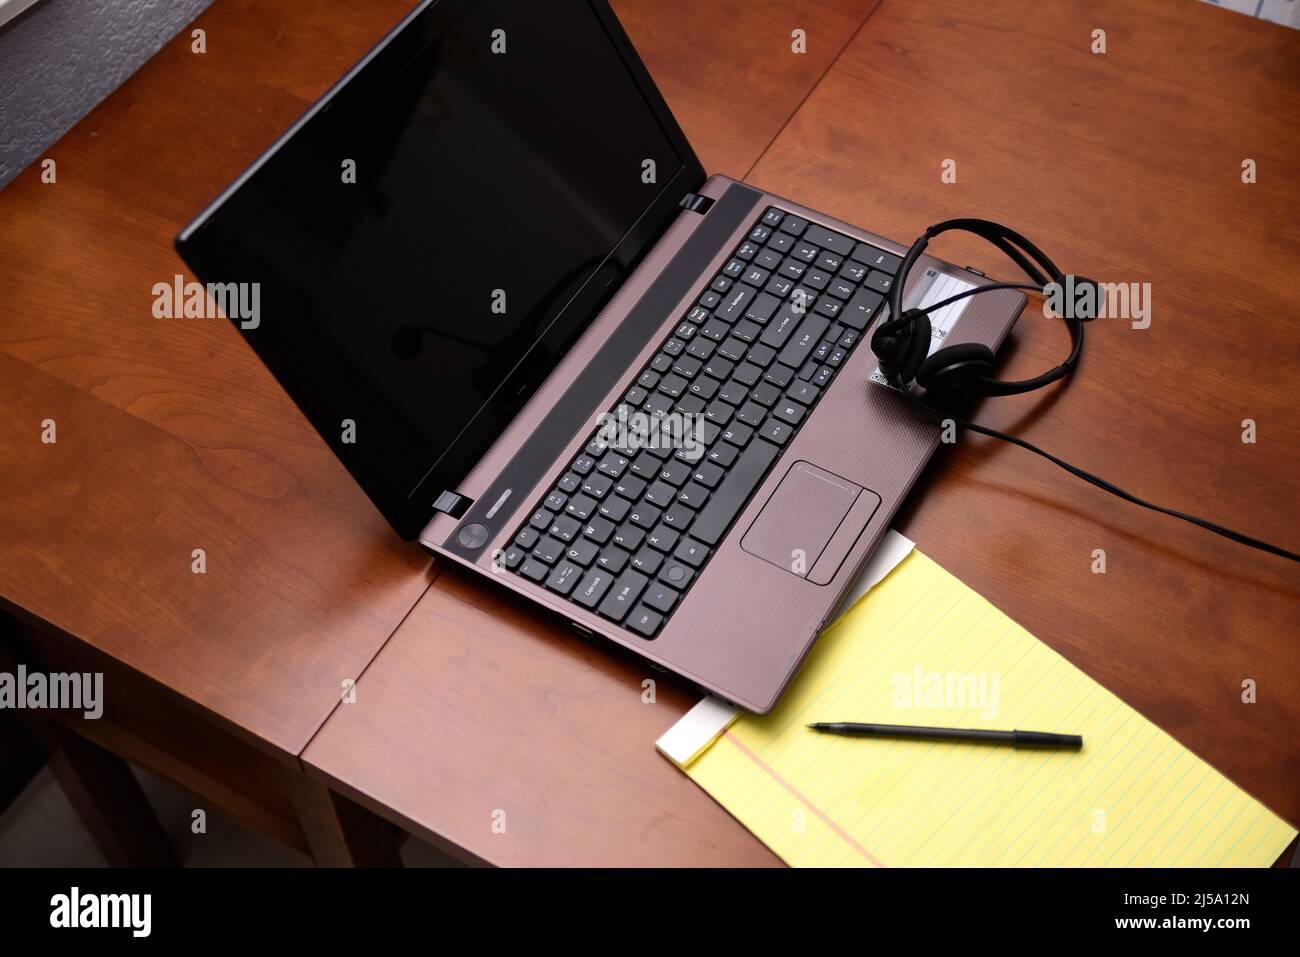 Open laptop computer with yellow pad and pen nearby for making notes. Stock Photo